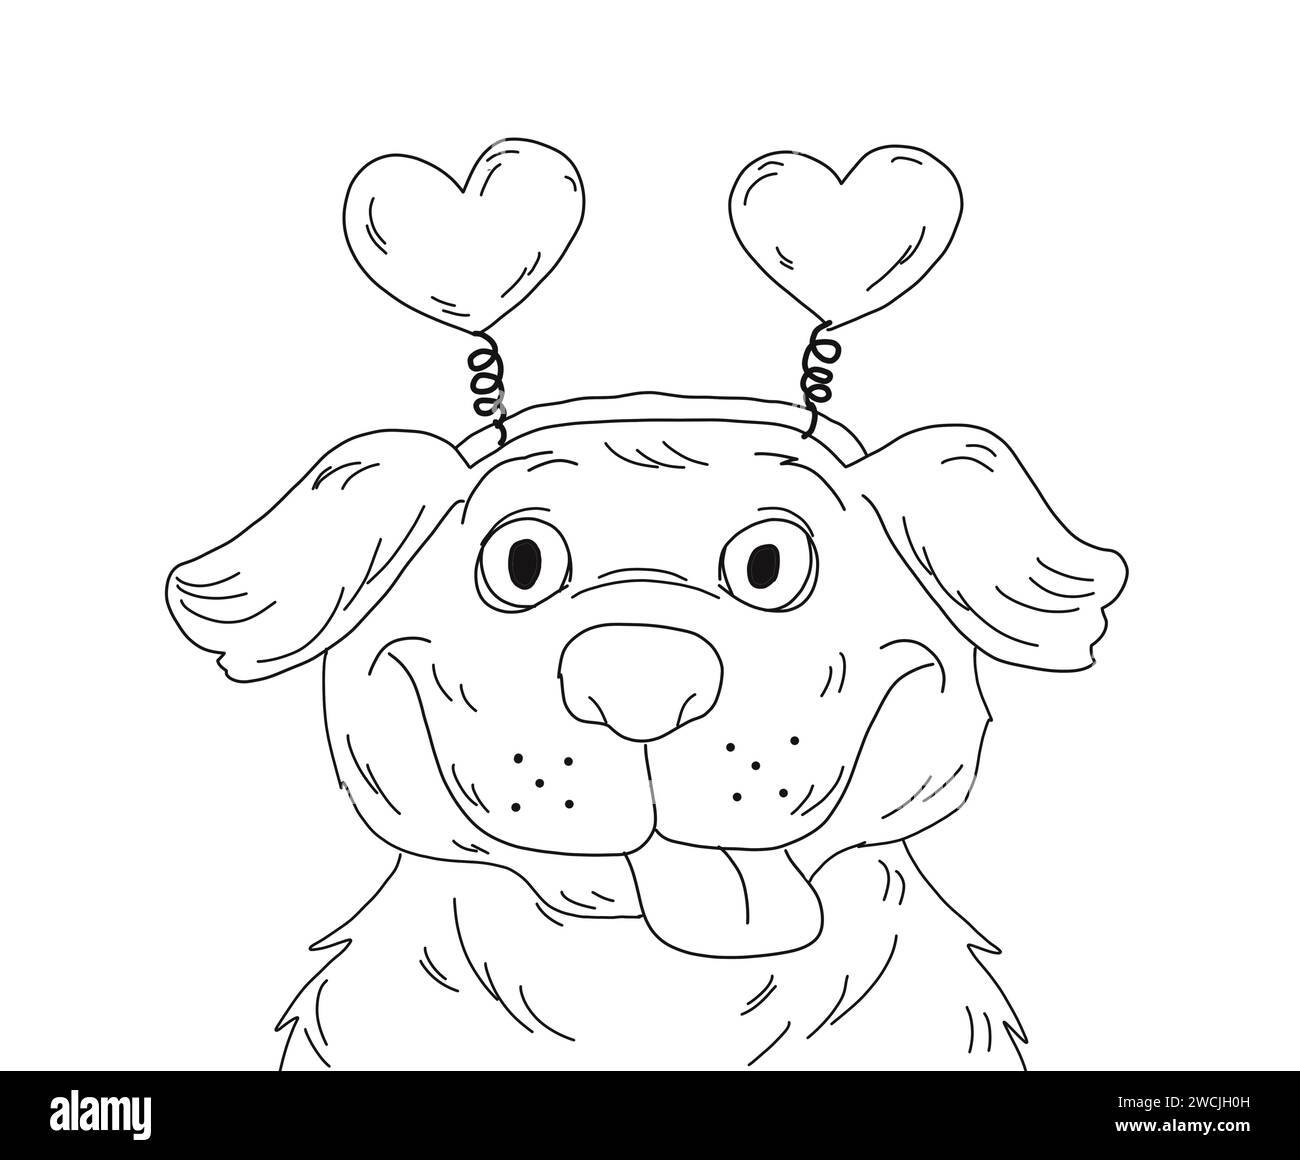 Cute dog wearing heart shape headband, tongue out. Valentine's holiday celebration. Black and white cartoon drawing for coloring book page. Stock Photo